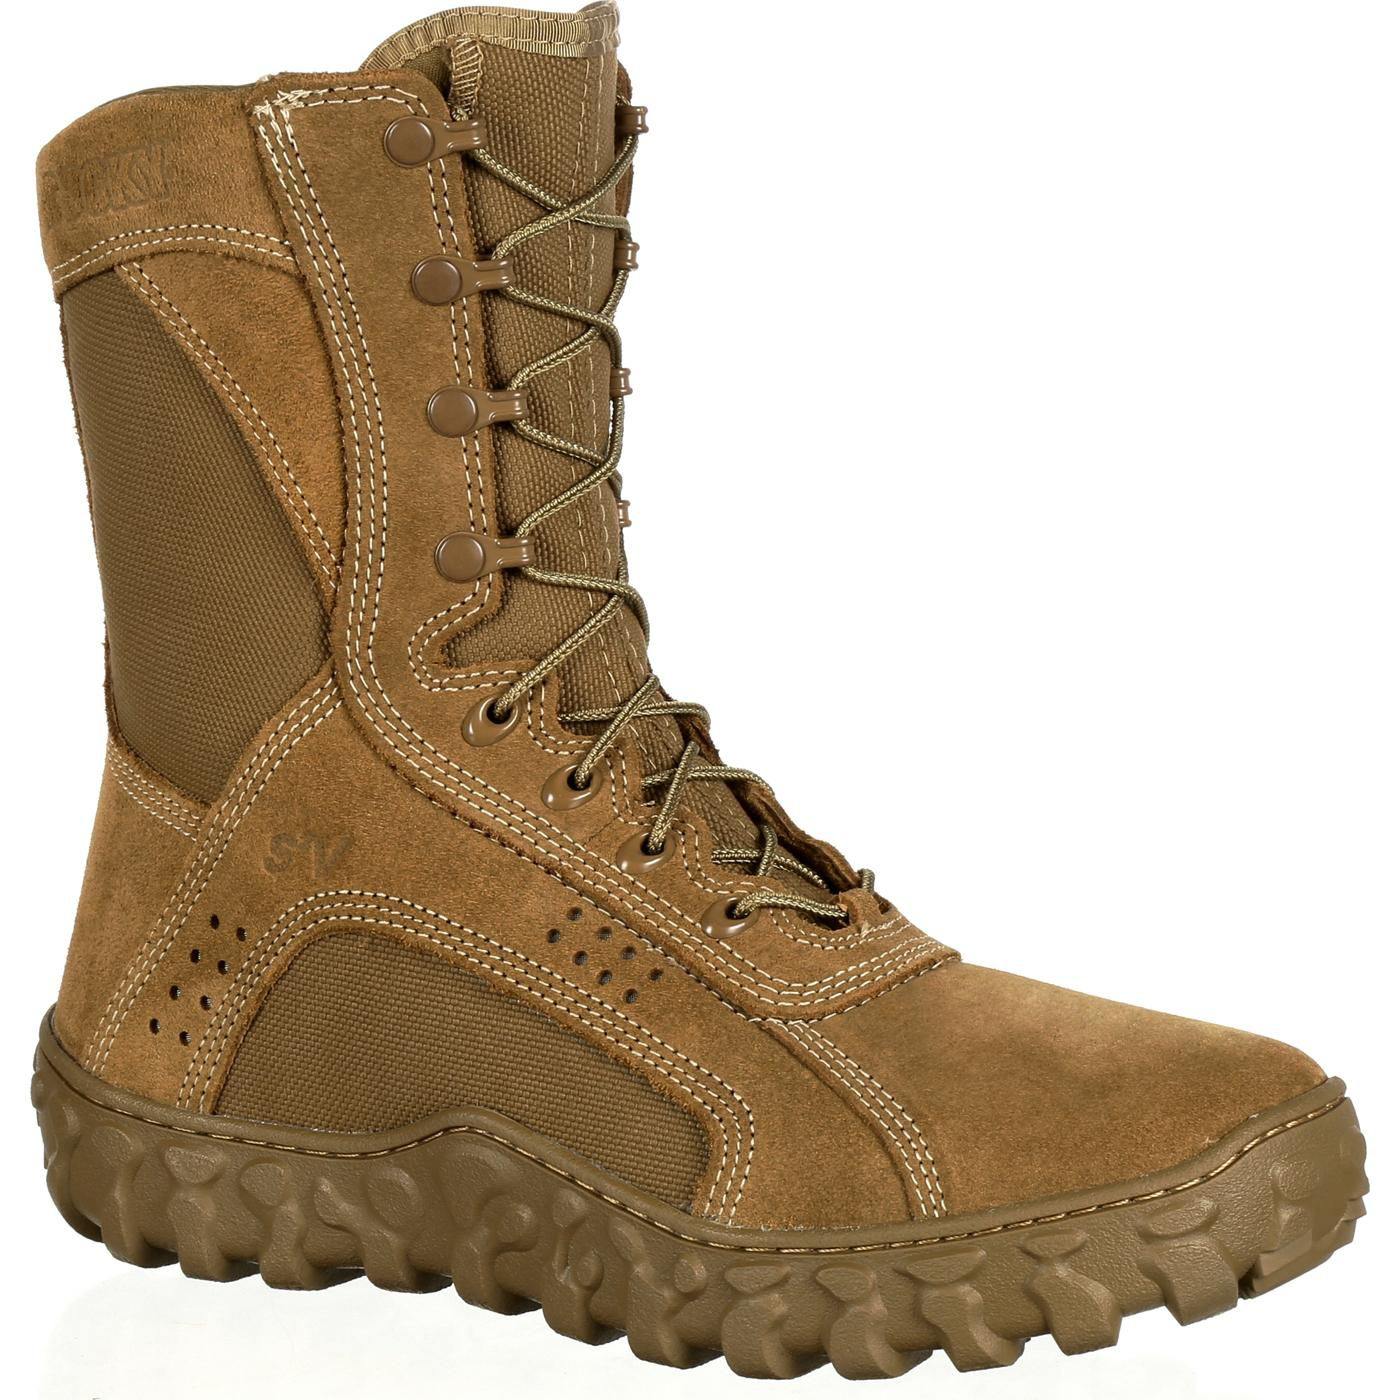 Rocky S2V Tactical Military Boots for Men - Coyote Brown - 9W